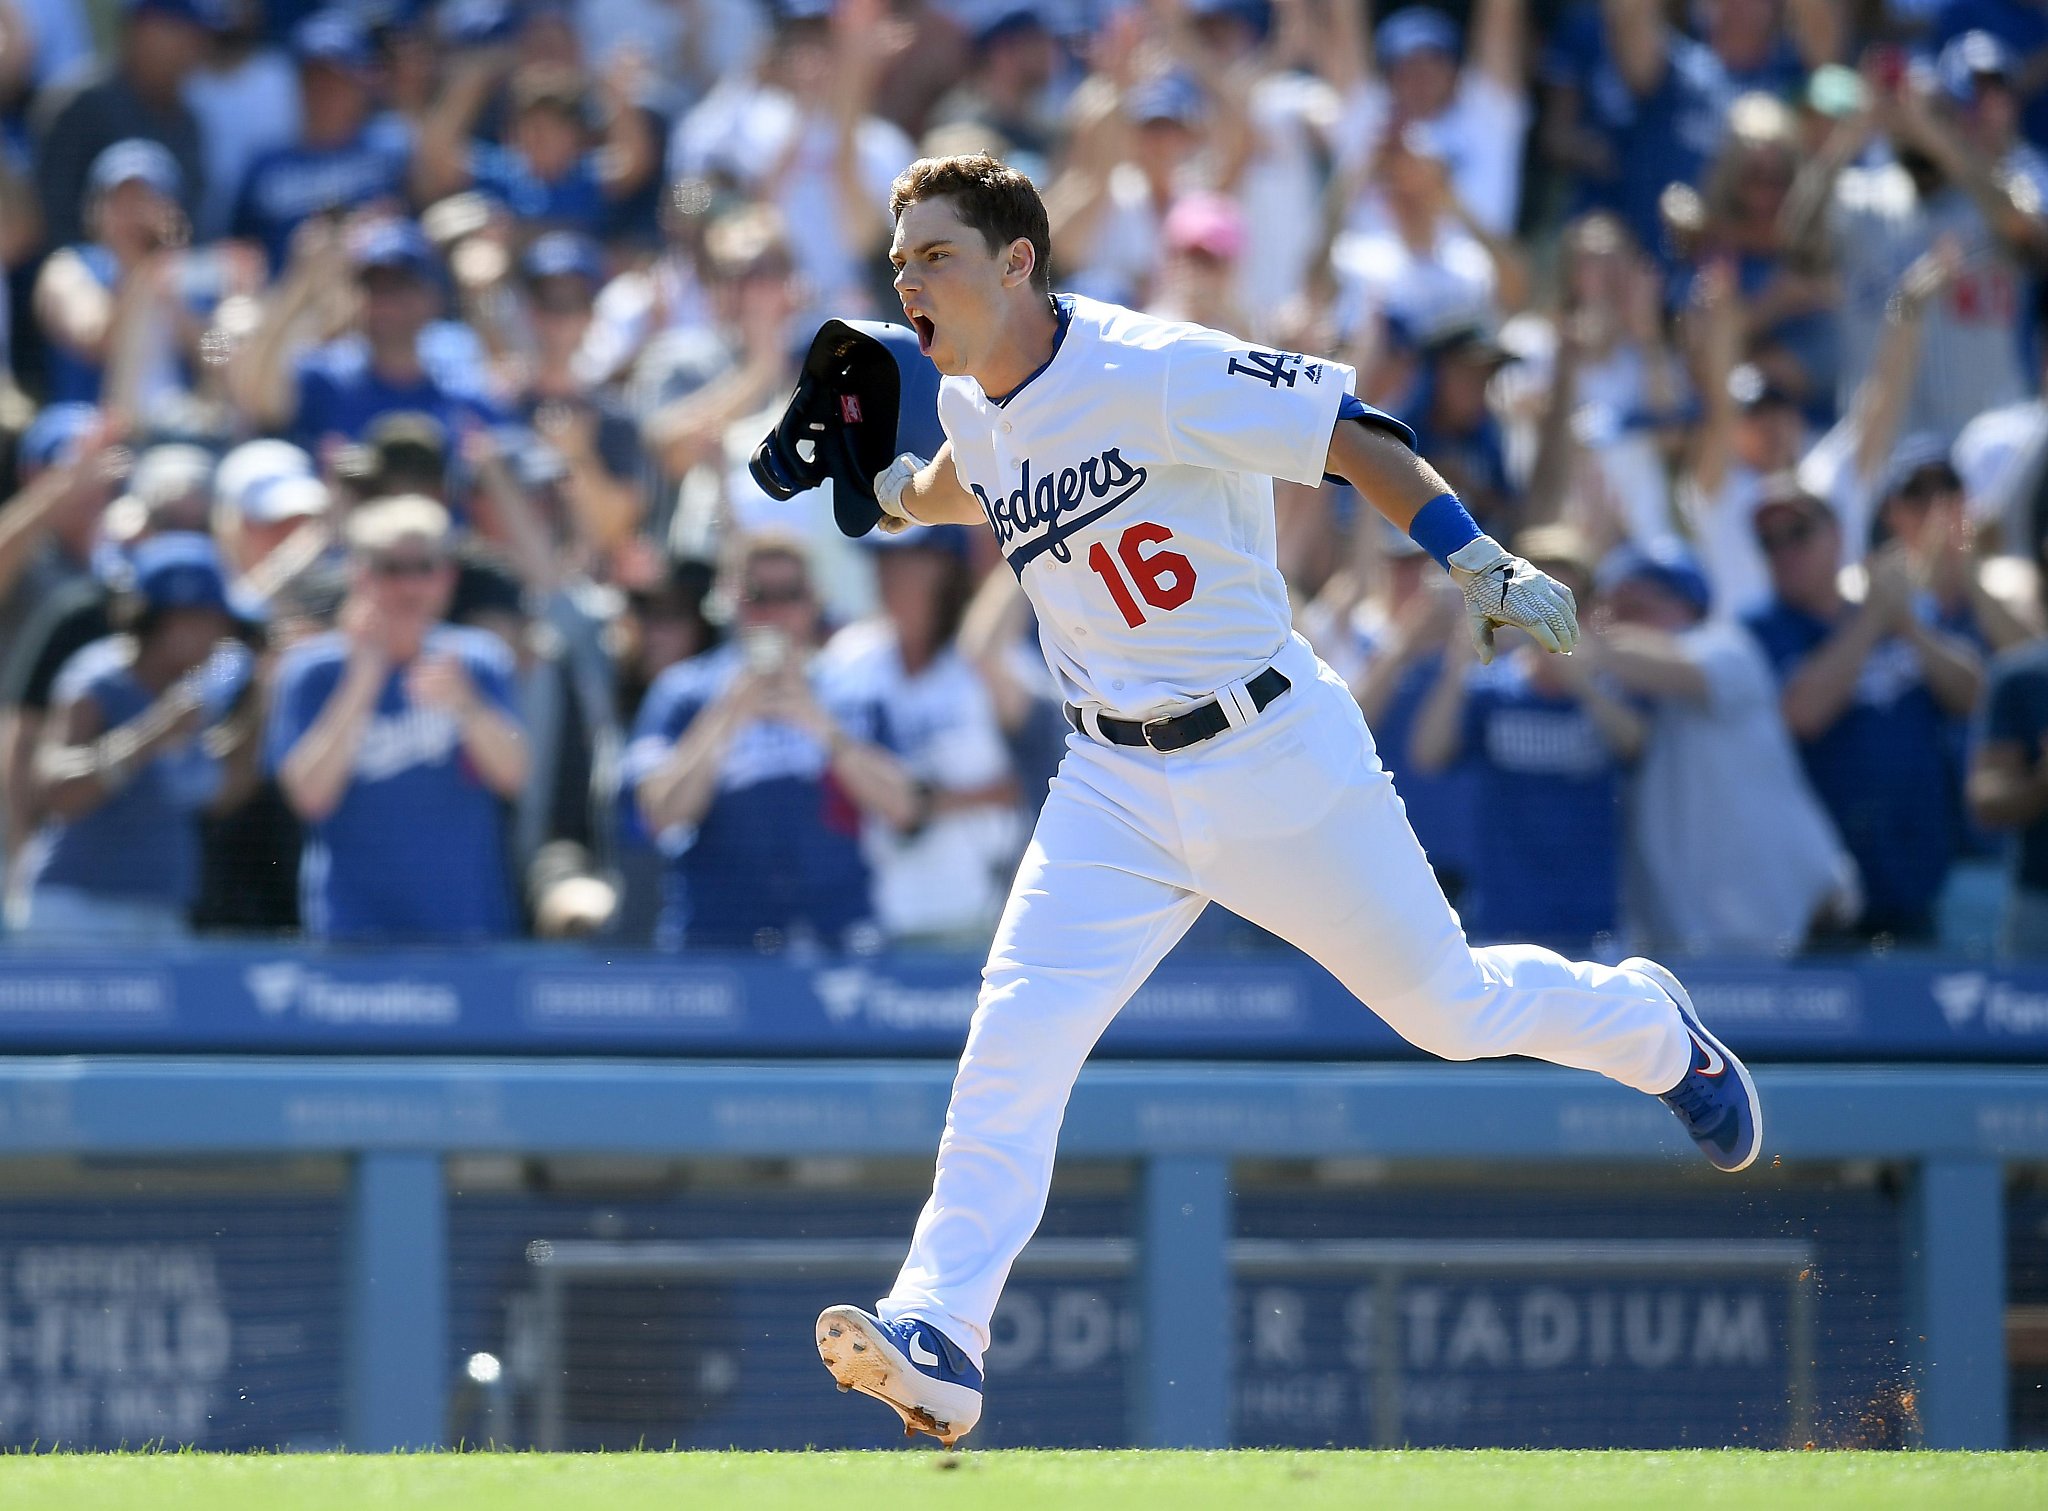 Dodgers' Will Smith hits WALK-OFF homer 